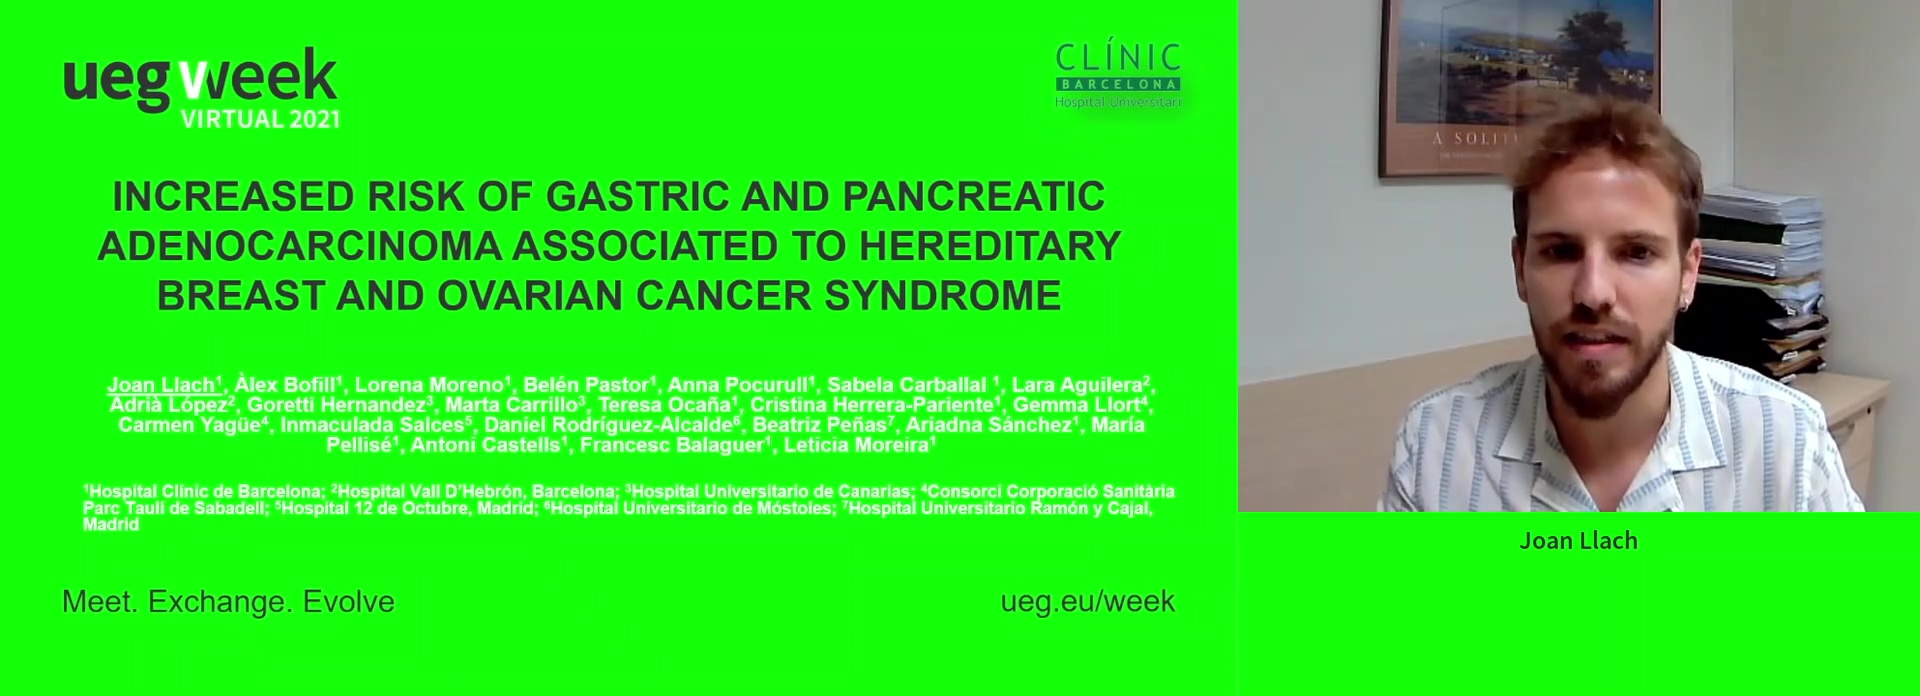 INCREASED RISK OF GASTRIC AND PANCREATIC ADENOCARCINOMA ASSOCIATED TO HEREDITARY BREAST AND OVARIAN CANCER SYNDROME